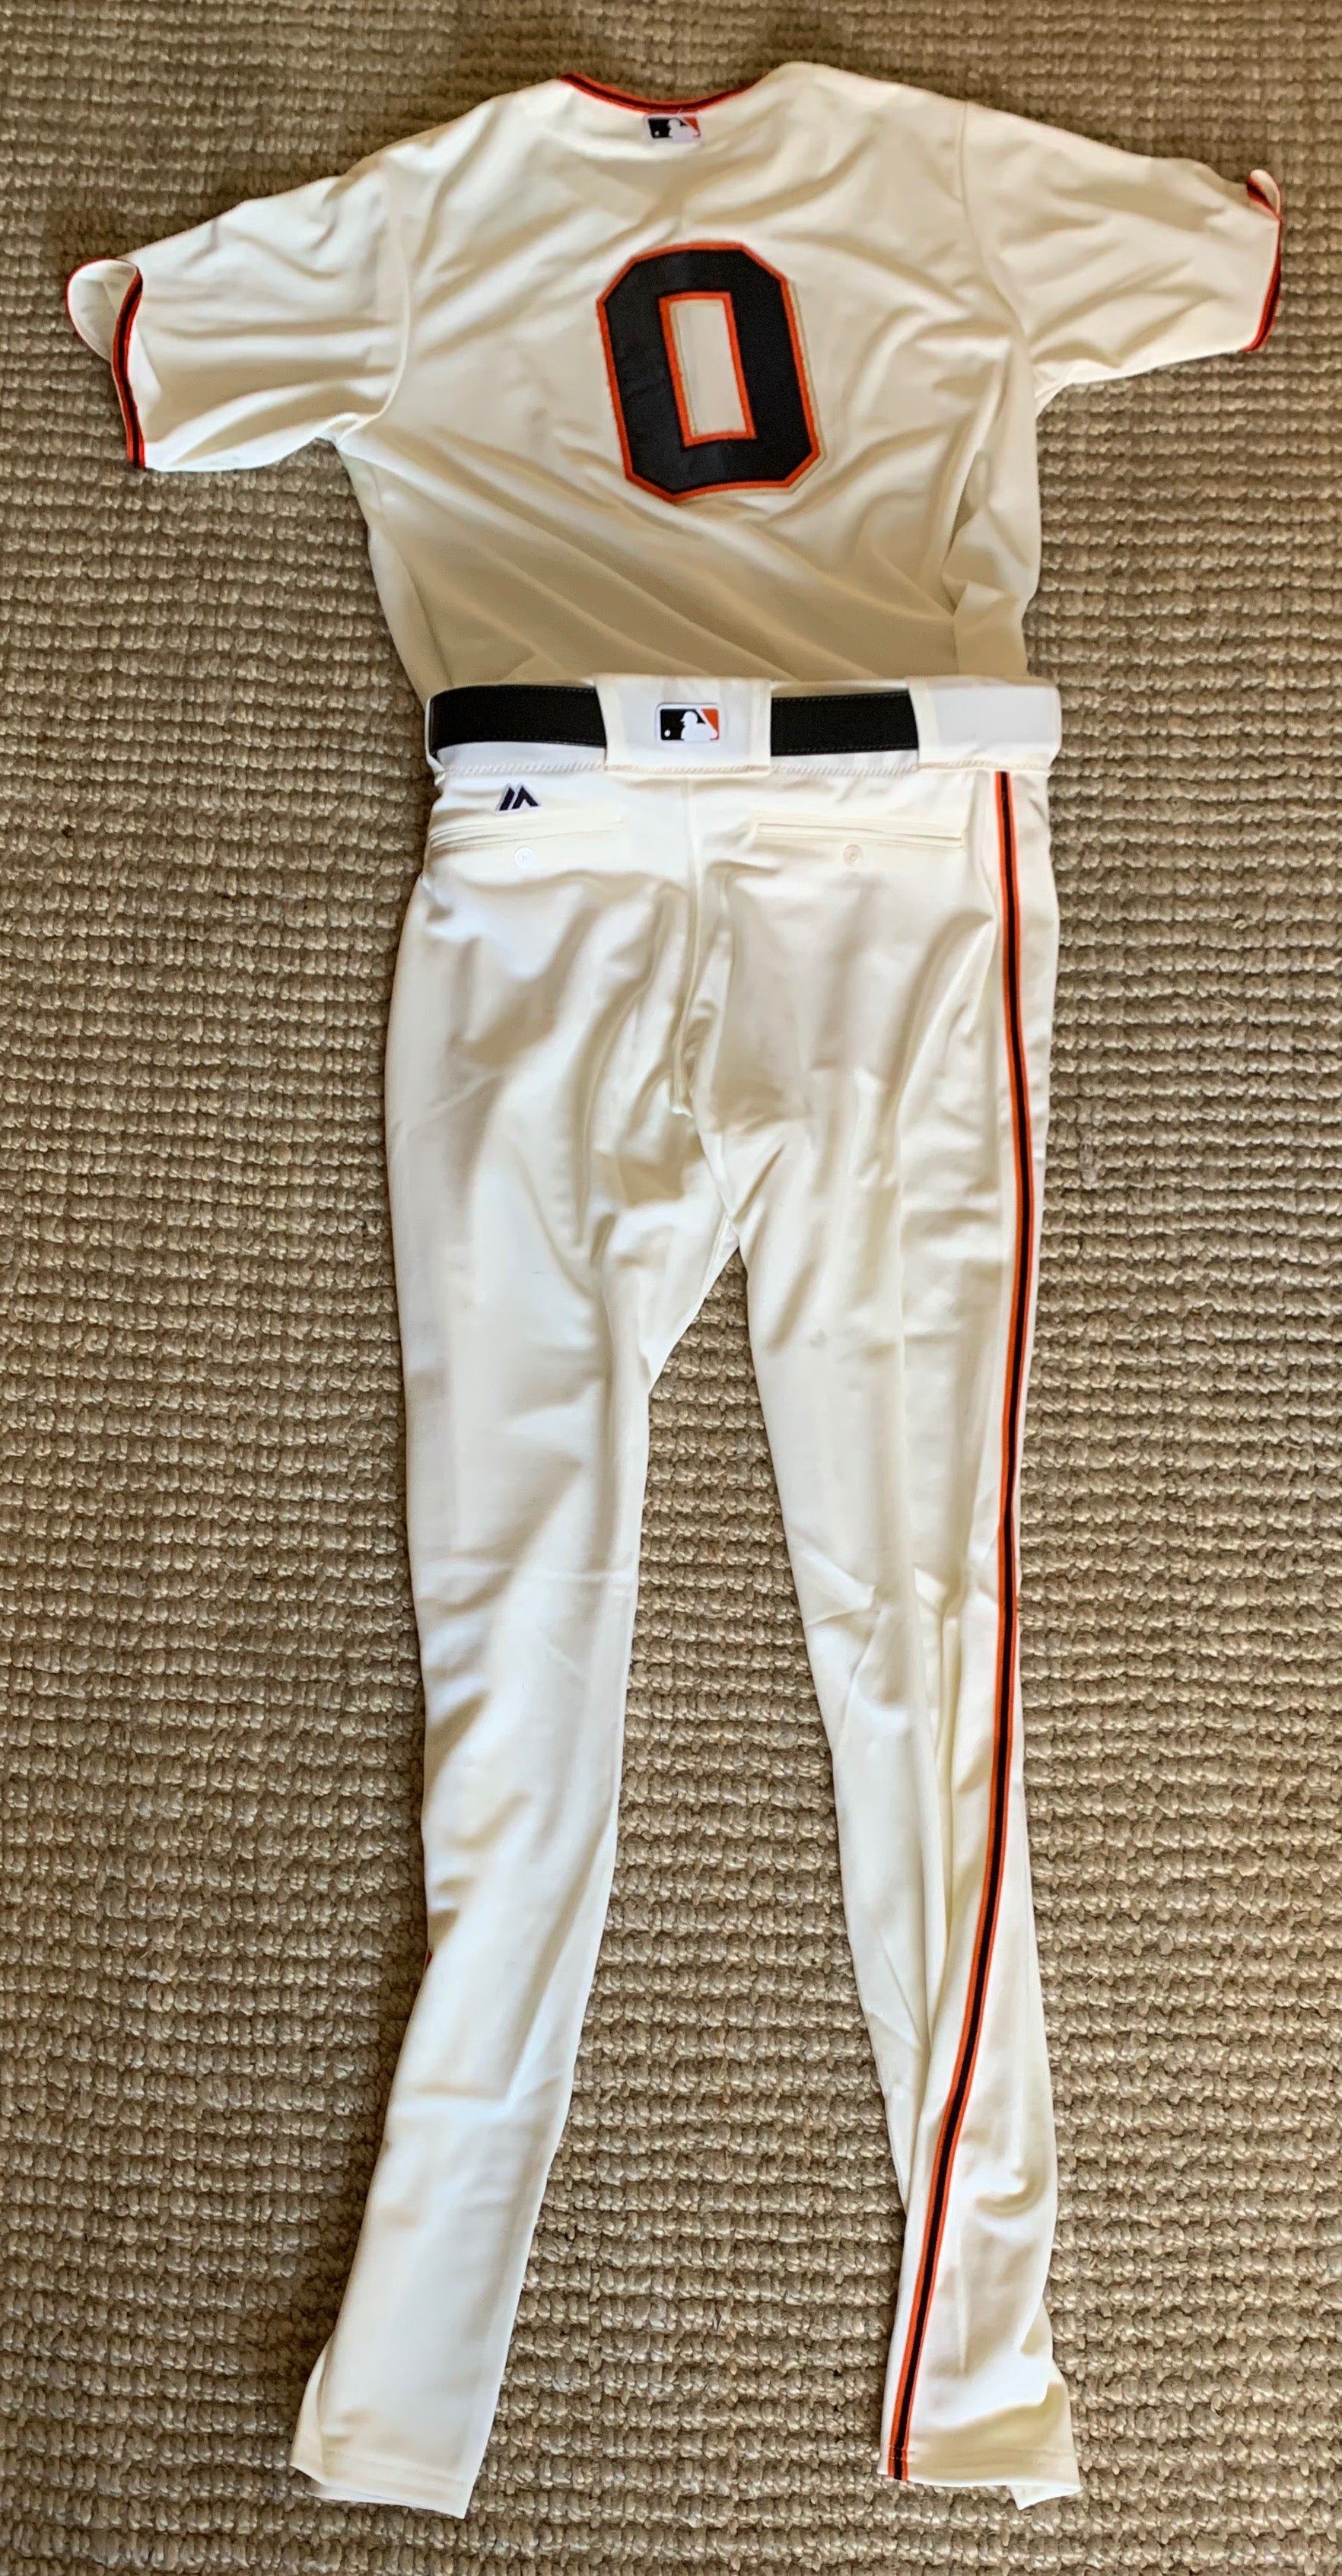 2018 Team Issued Black Gigantes Jersey and Team Issued Pants - #28